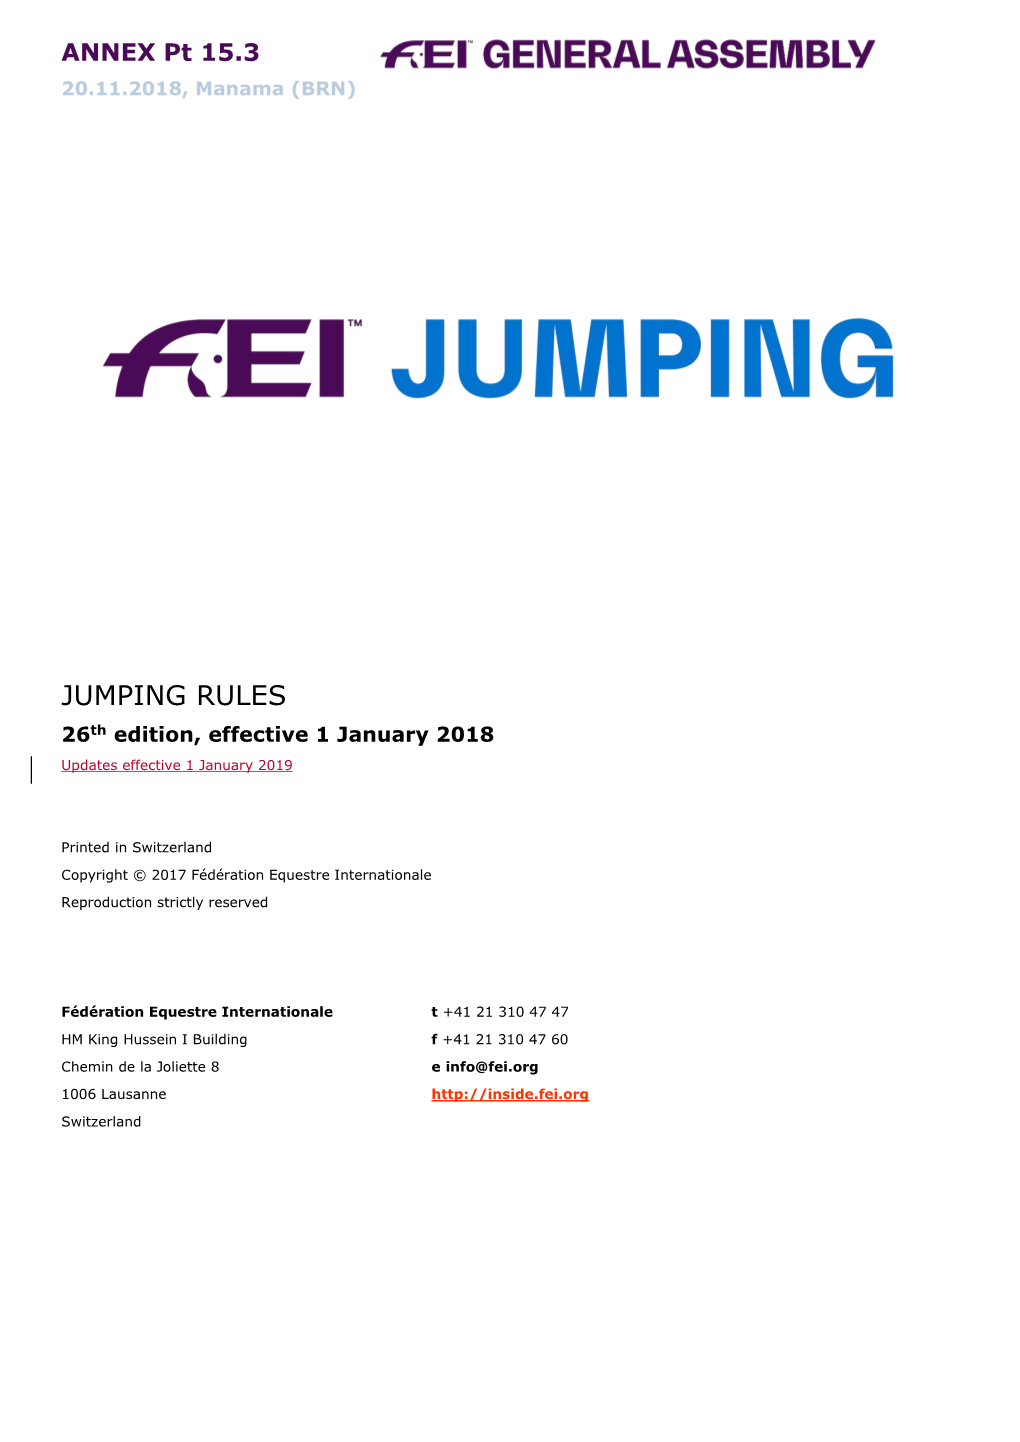 JUMPING RULES 26Th Edition, Effective 1 January 2018 Updates Effective 1 January 2019